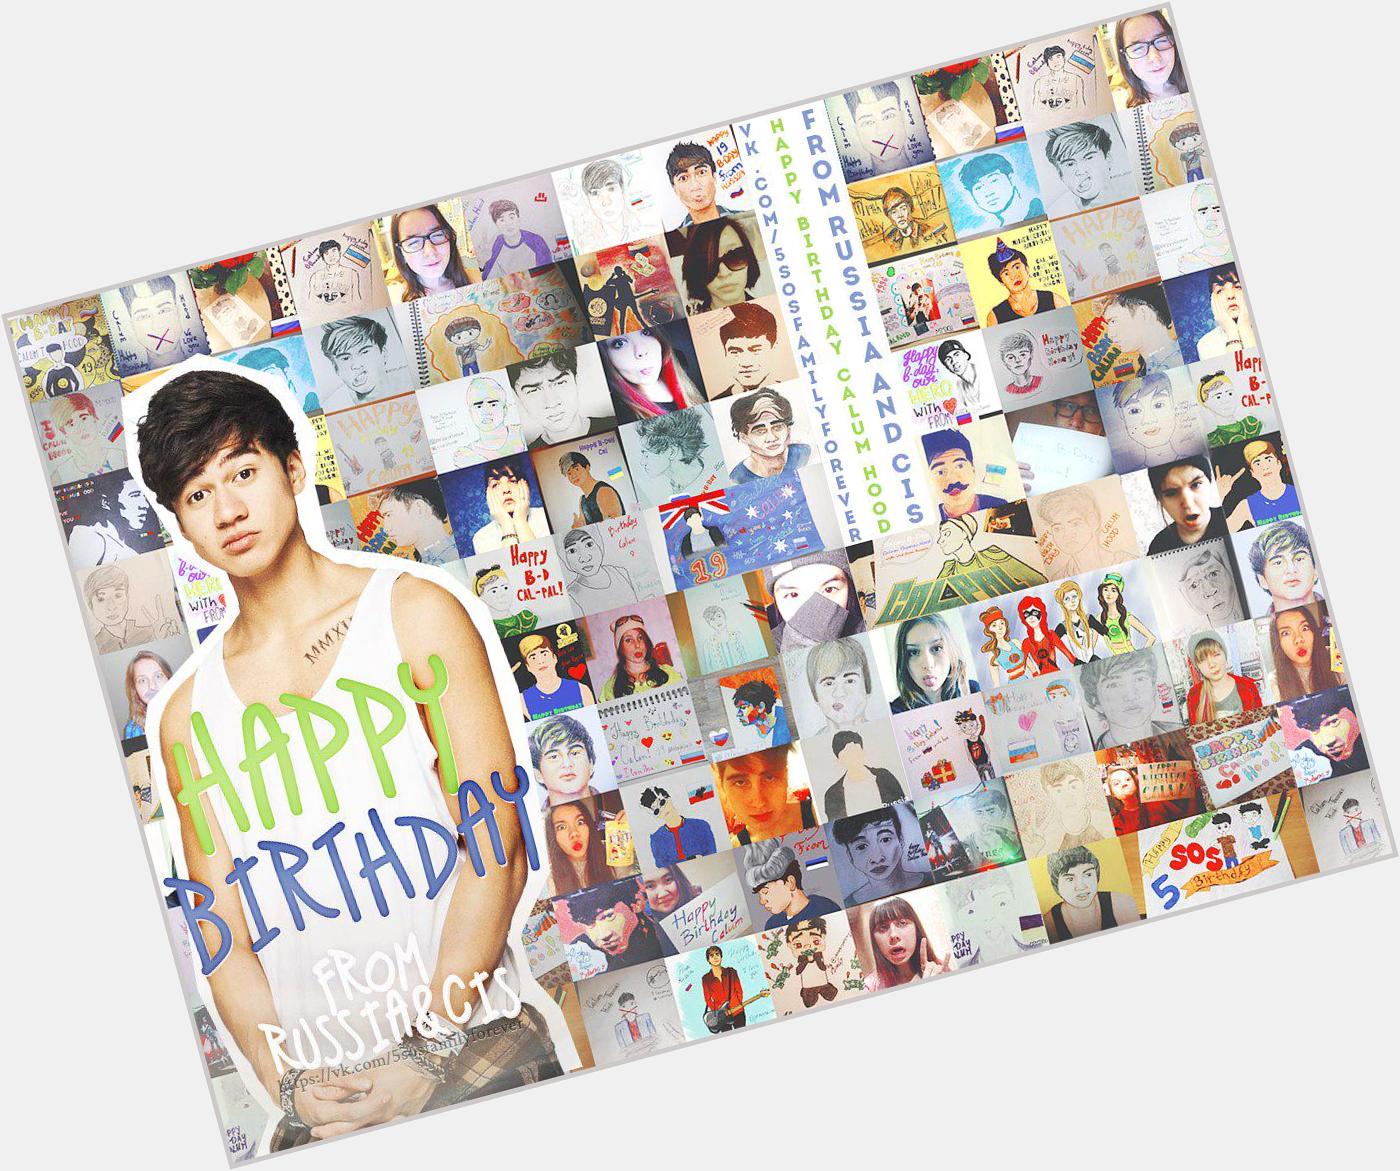 Calum Hood, I love you so much! Happy Birthday from Russia and CIS!  x26 